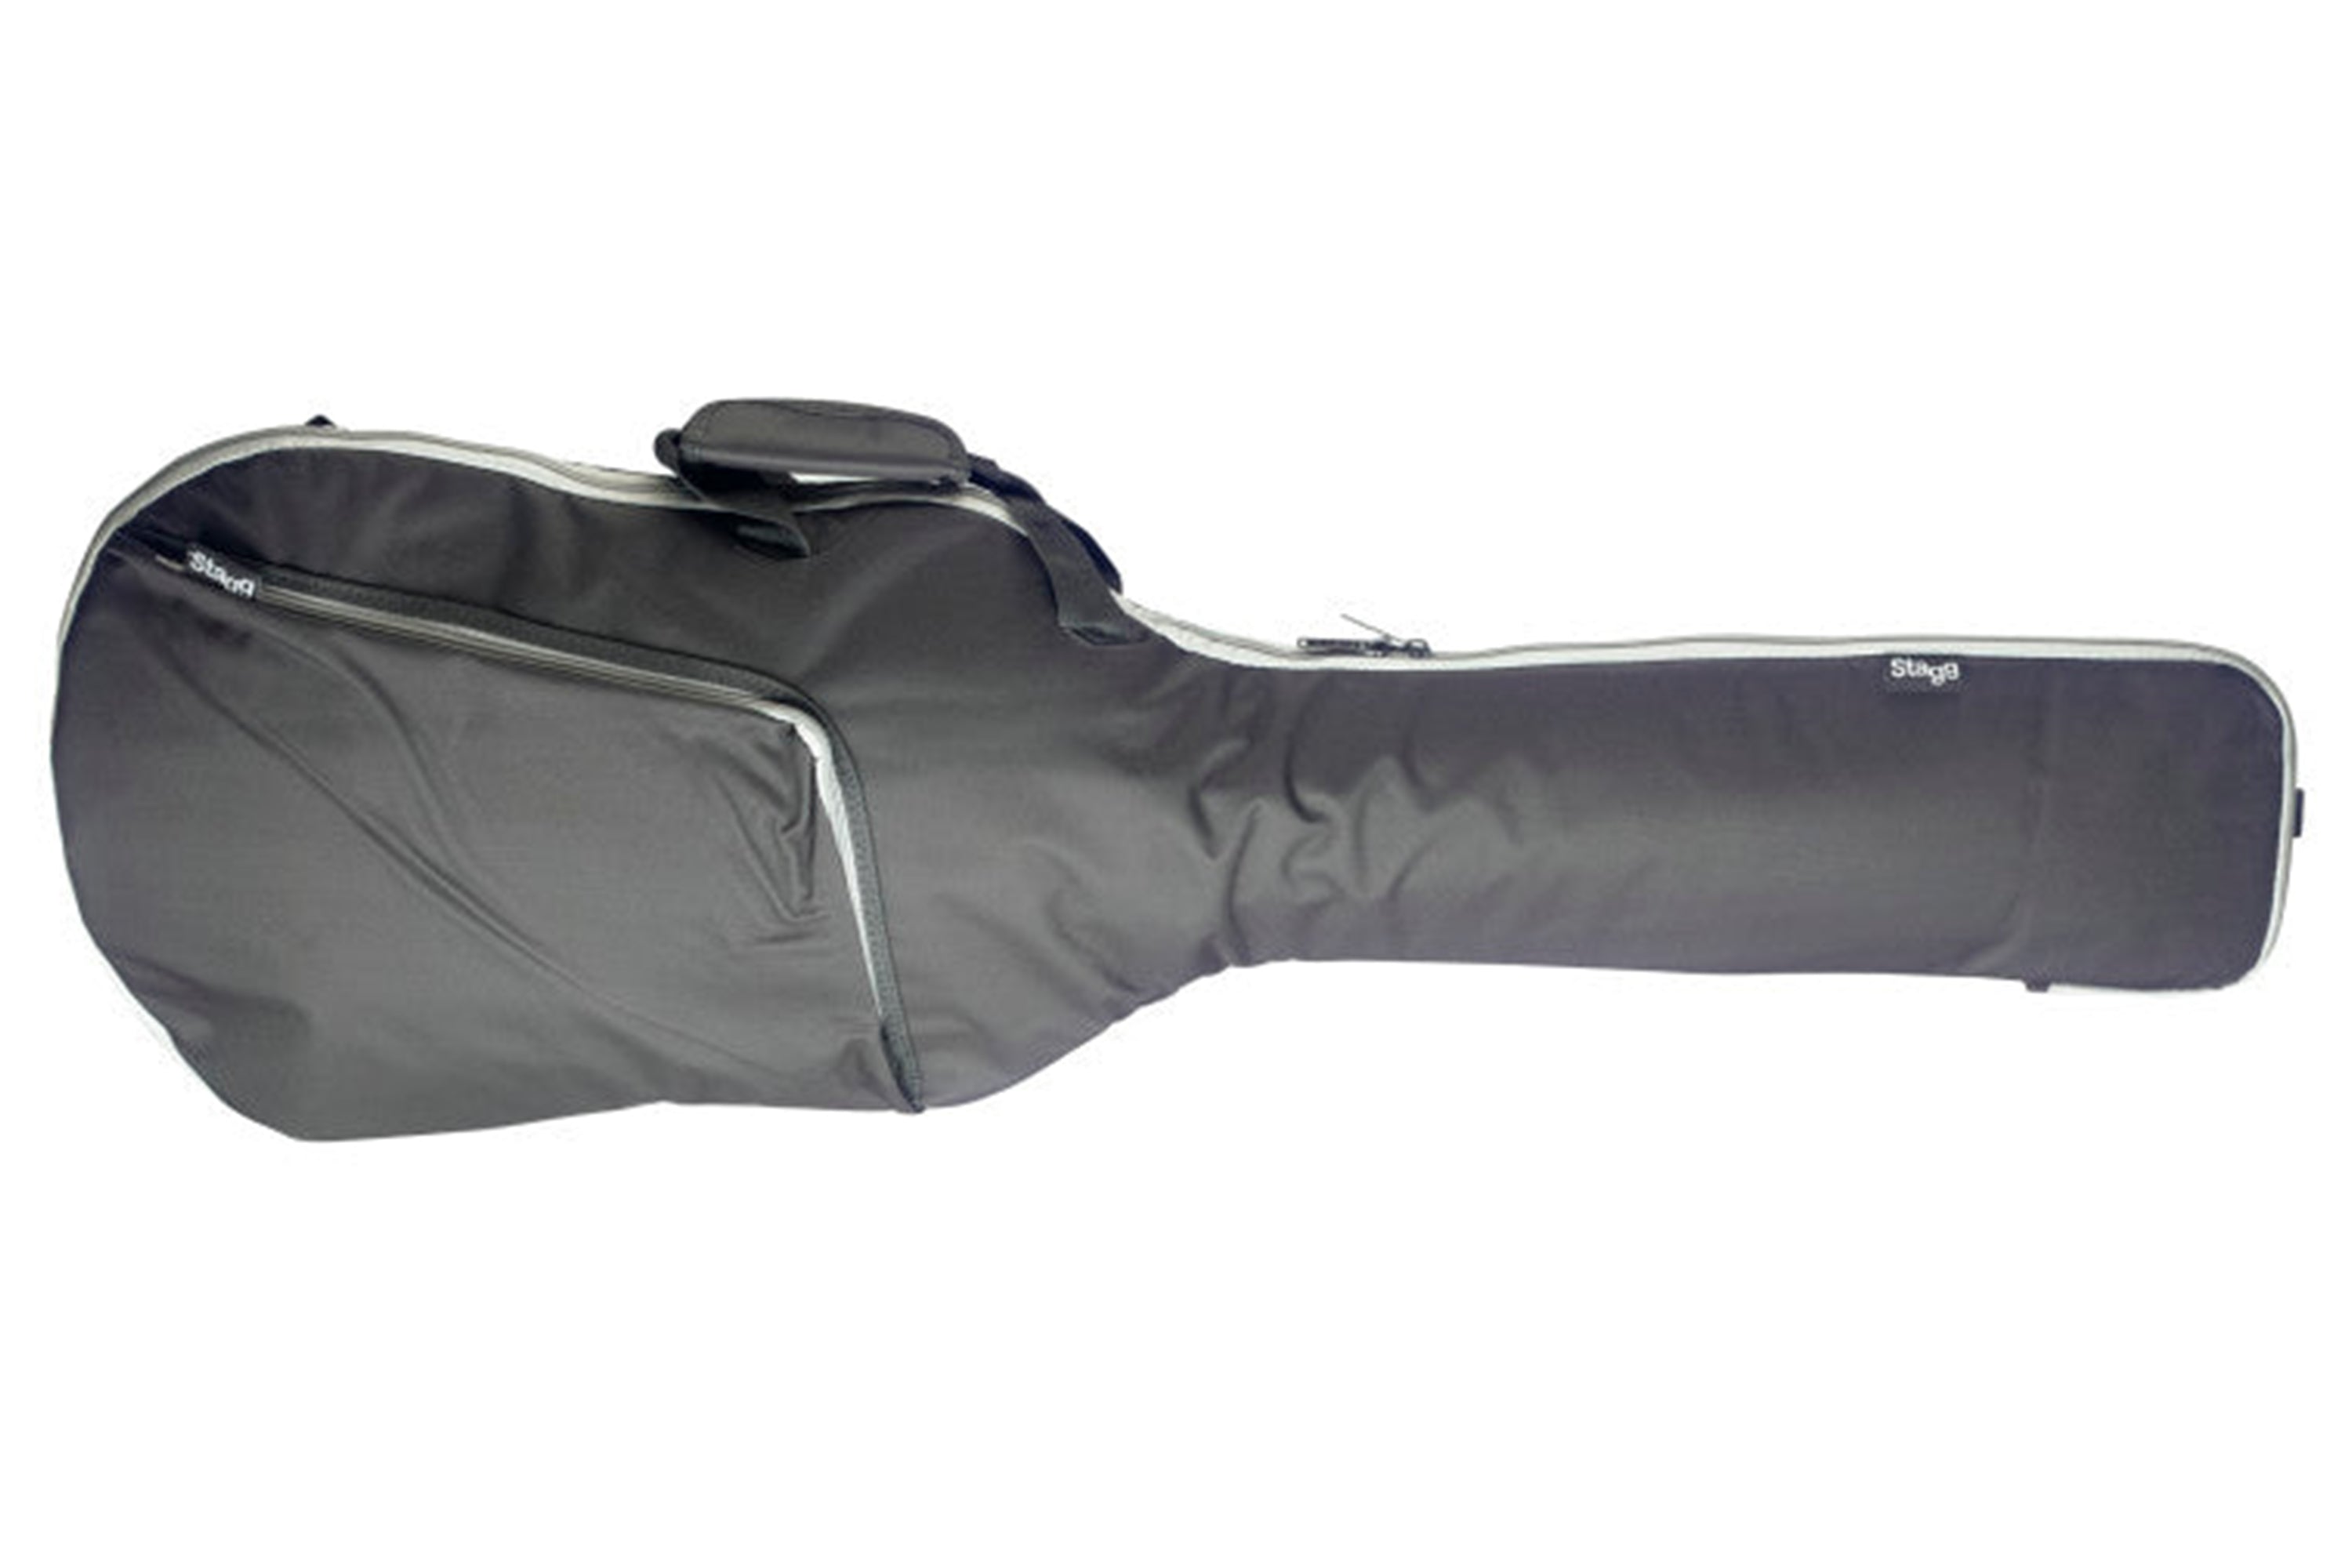 Stagg STB-10-UE Padded Gig Bag - ELECTRIC GUITAR "Maku" - Discounted